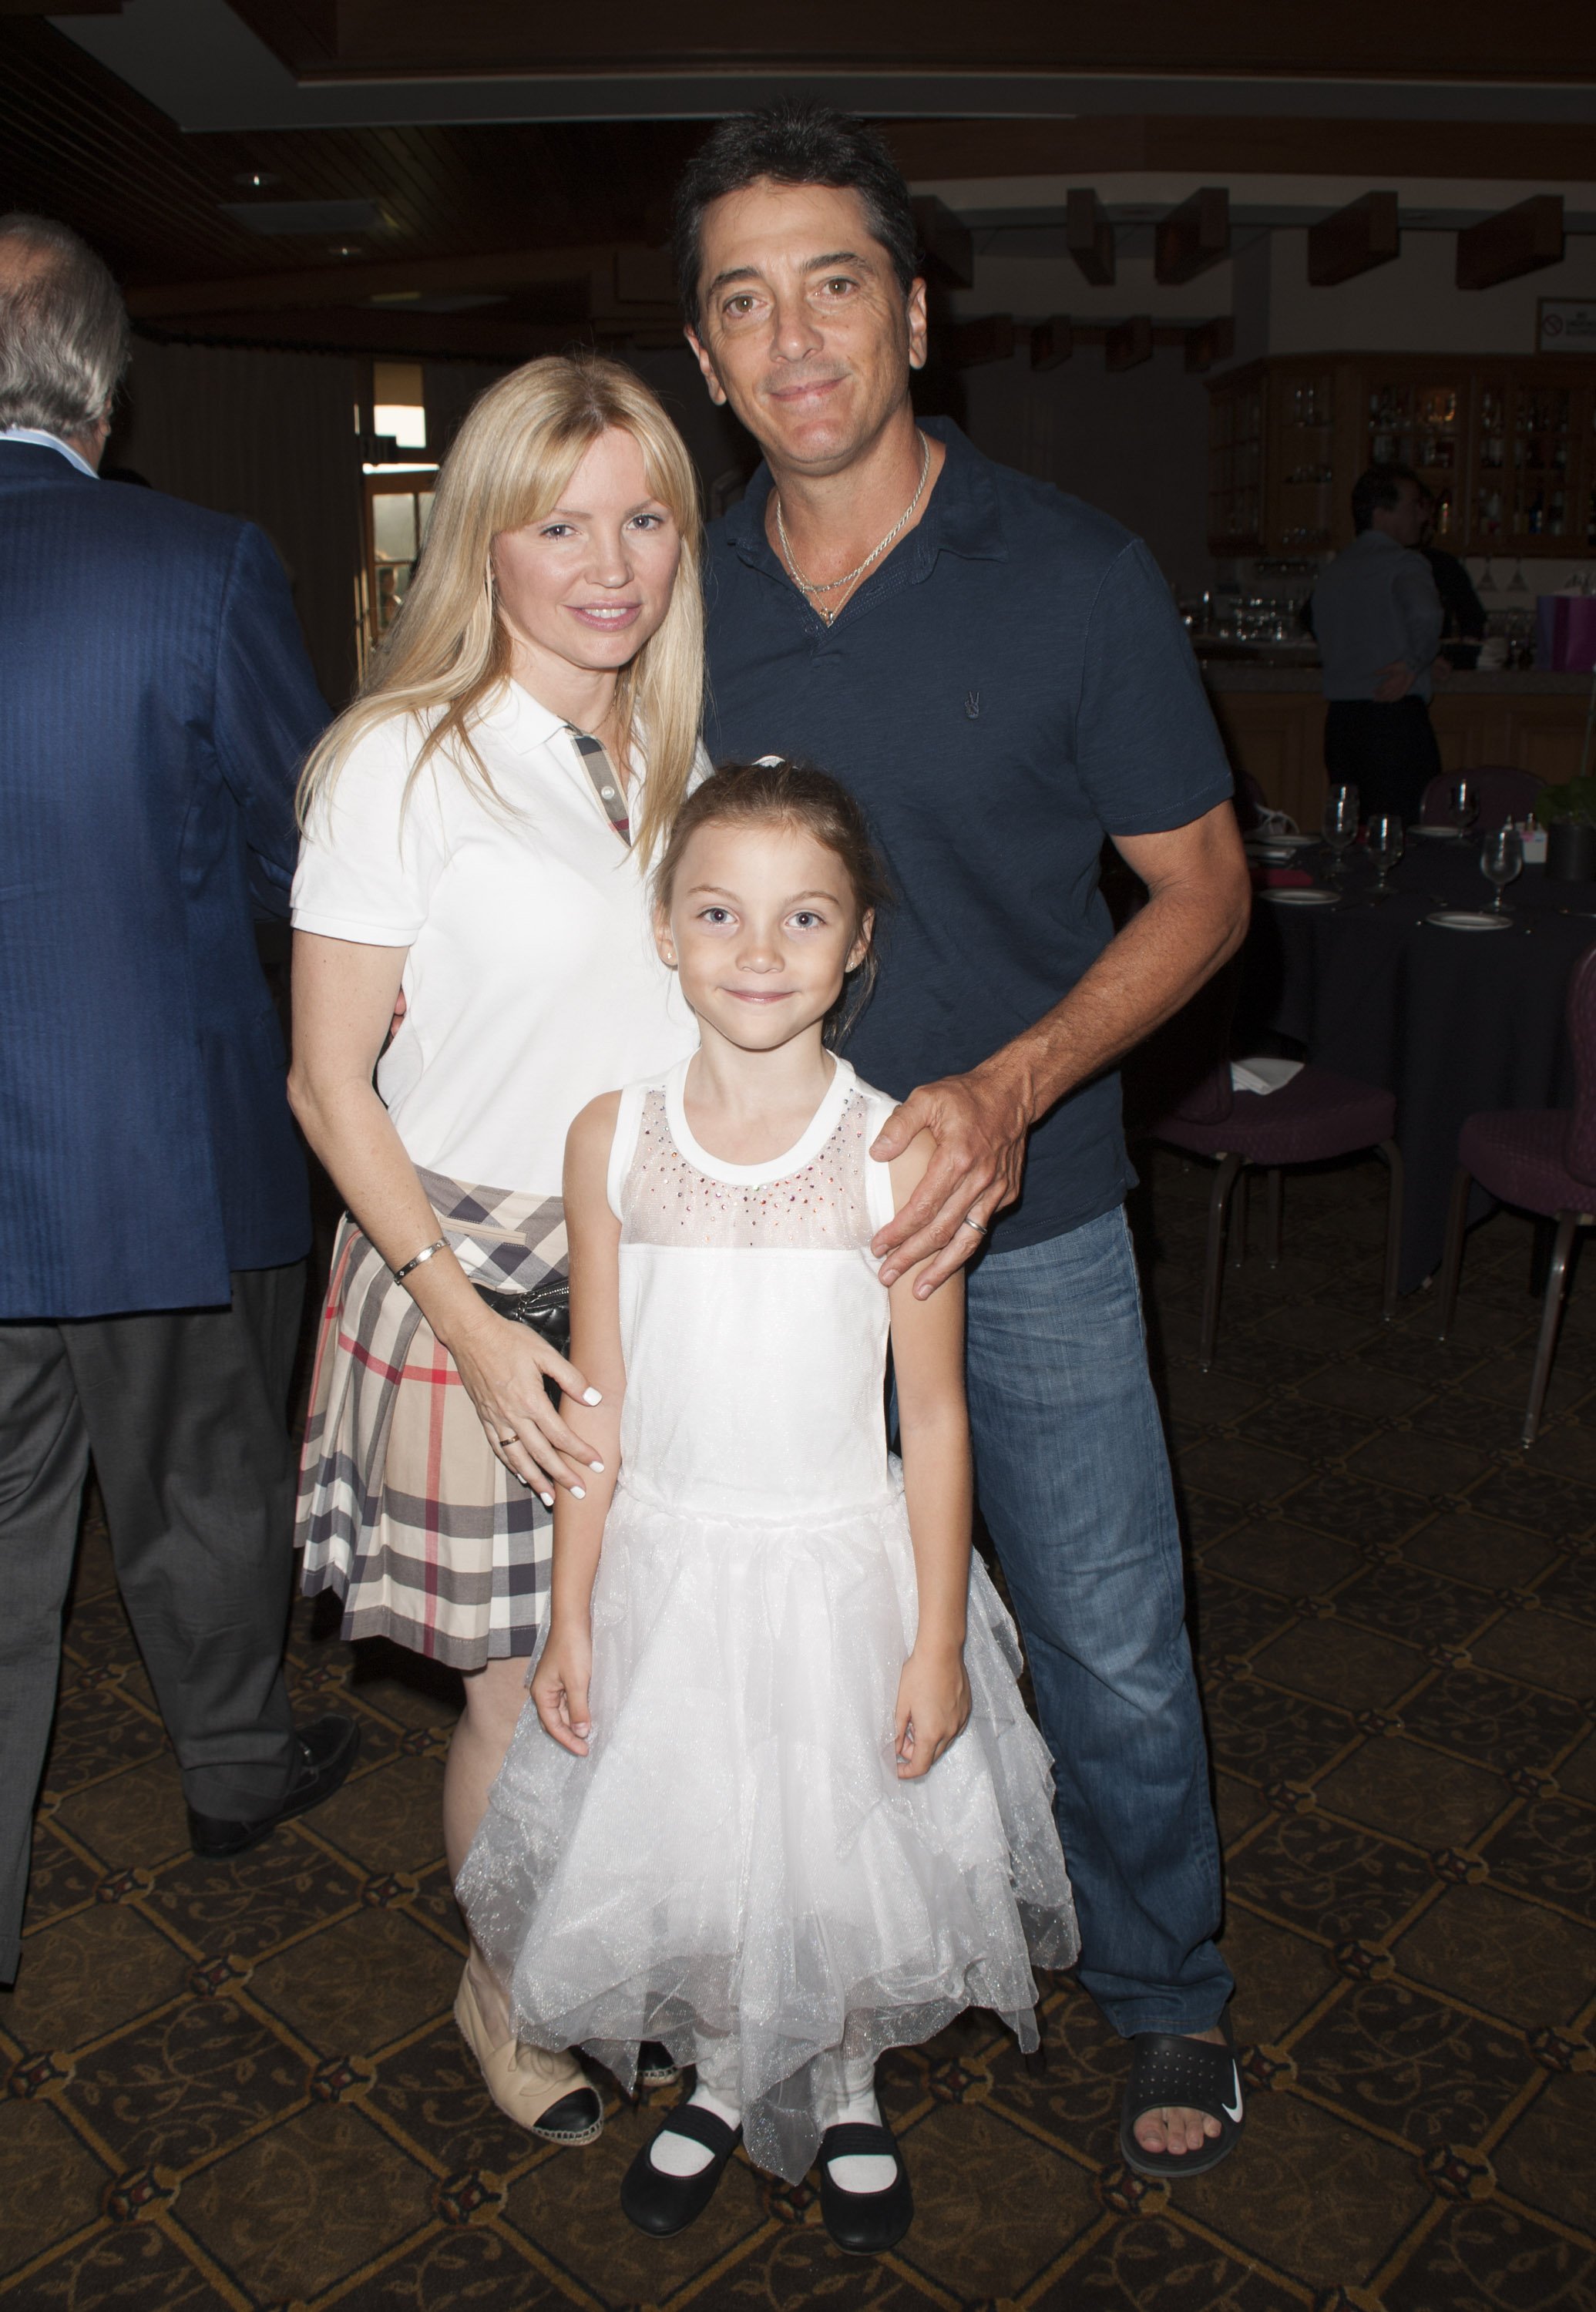 Scott Baio with Renee Sloan and daughter Bailey Baio during the Scott Baio 1st annual charity golf tournament at Woodland Hills Country Club on September 21, 2015 in Woodland Hills, California. / Source: Getty Images